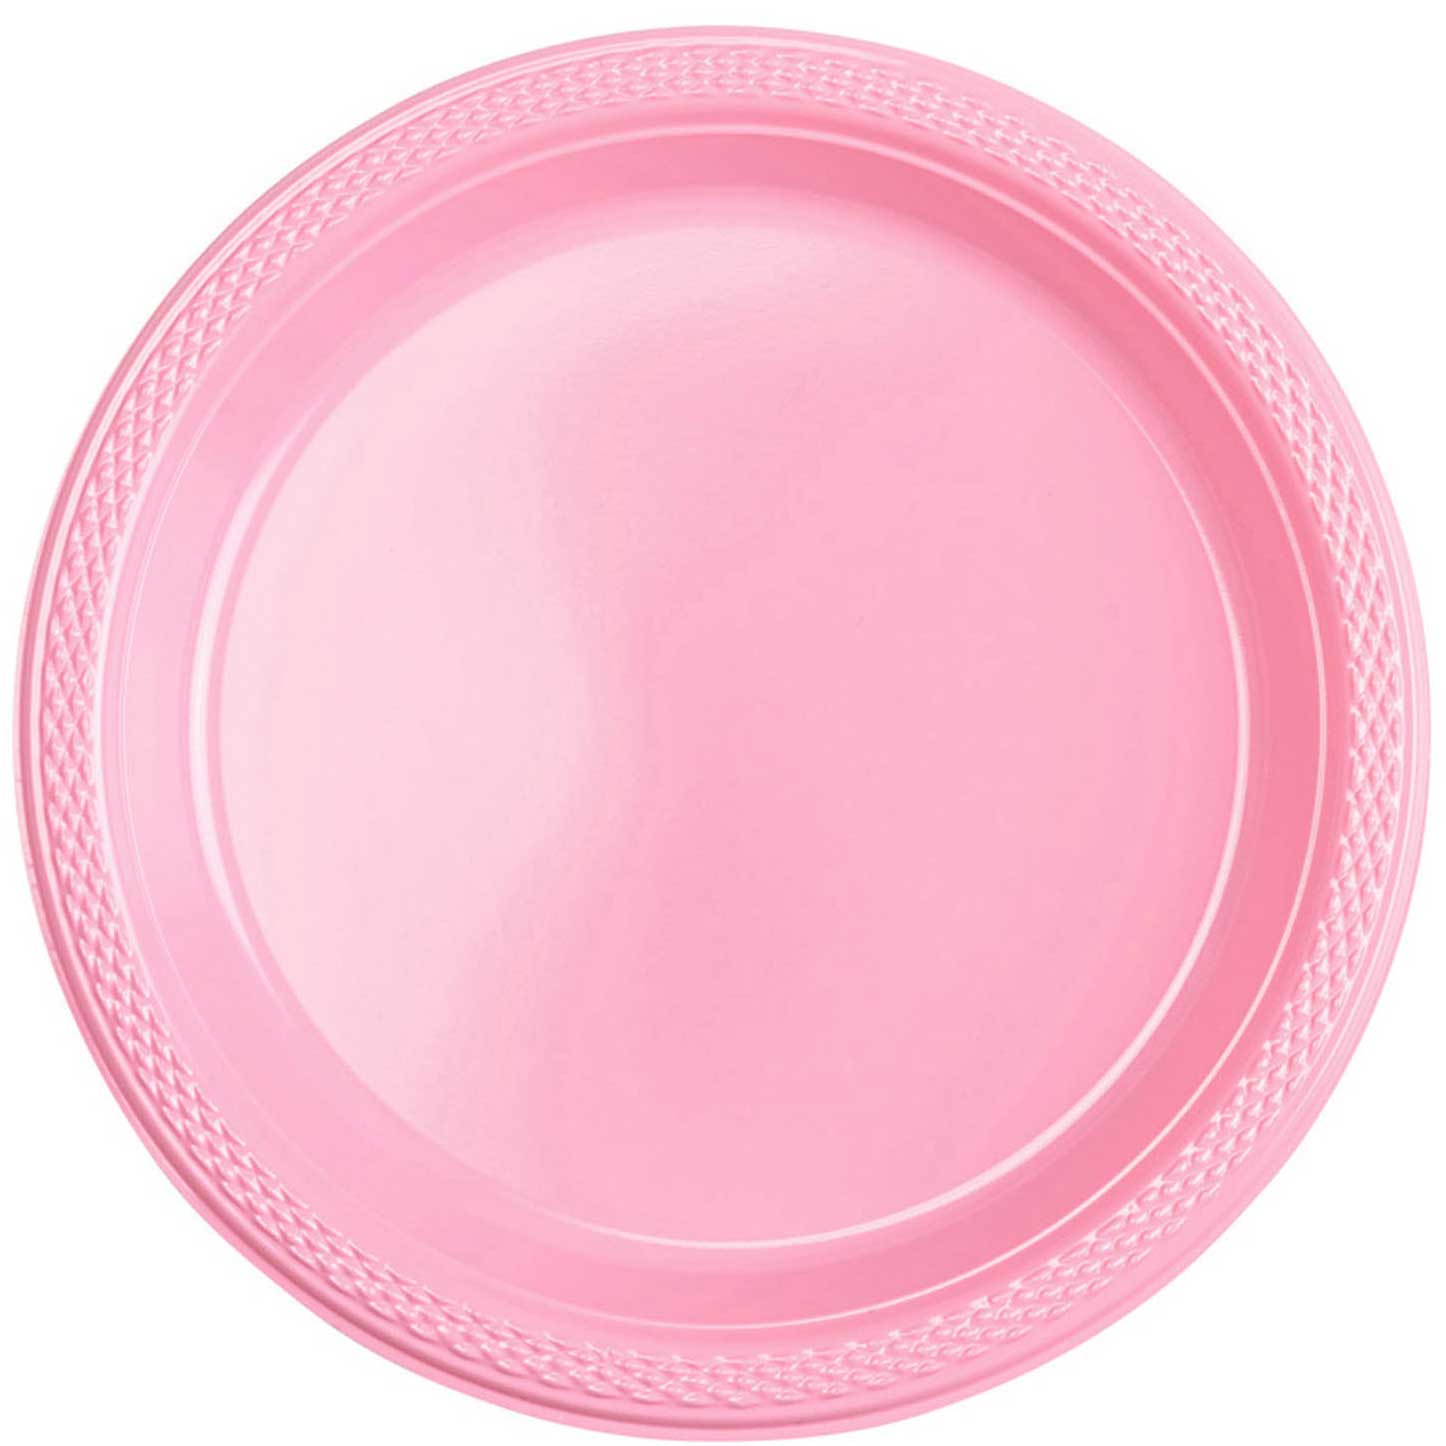 New Pink Plastic Plates 10in, 20pcs Solid Tableware - Party Centre